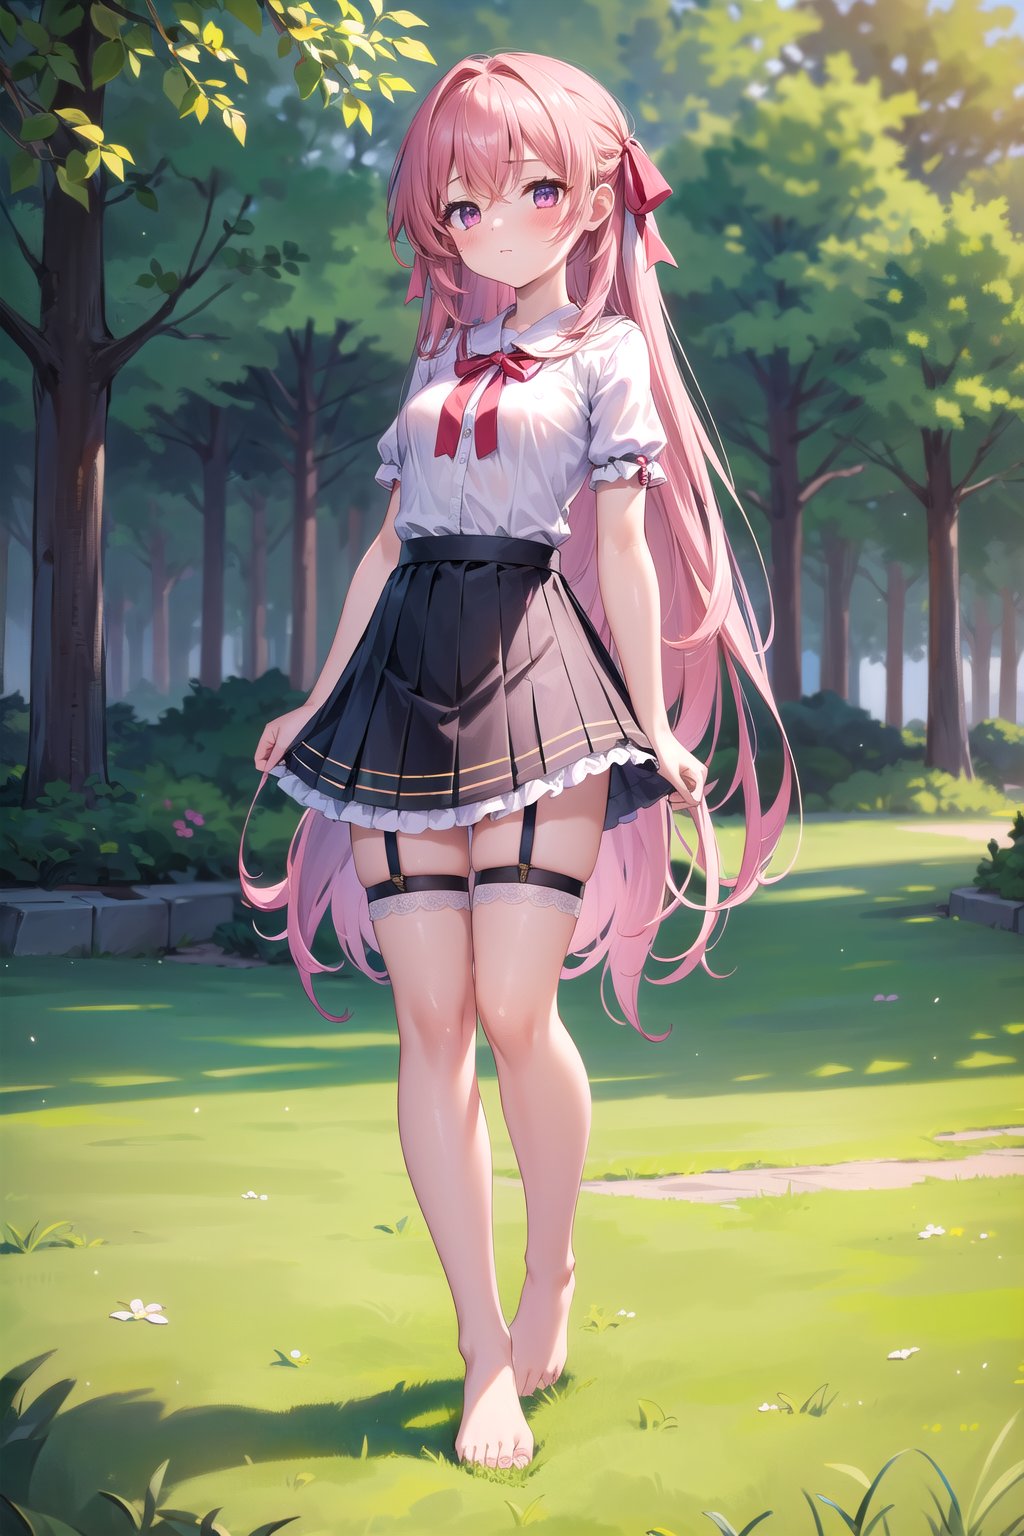 1girl, (foot focus:1.3), (small to medium sized breasts:1.2), long hair with hair ribbon, blush on her cheeks, good hands, (full body shot:1.5), looking_at_viewer exuding confidence and allure, masterpiece, textured skin and high-quality details render every feature anatomically correct, highest quality and most minute details, best quality, highres, 1080P, 4K, 8k, detailed_background, outdoors, skirt, (garter ring), wetshirt, bent knee